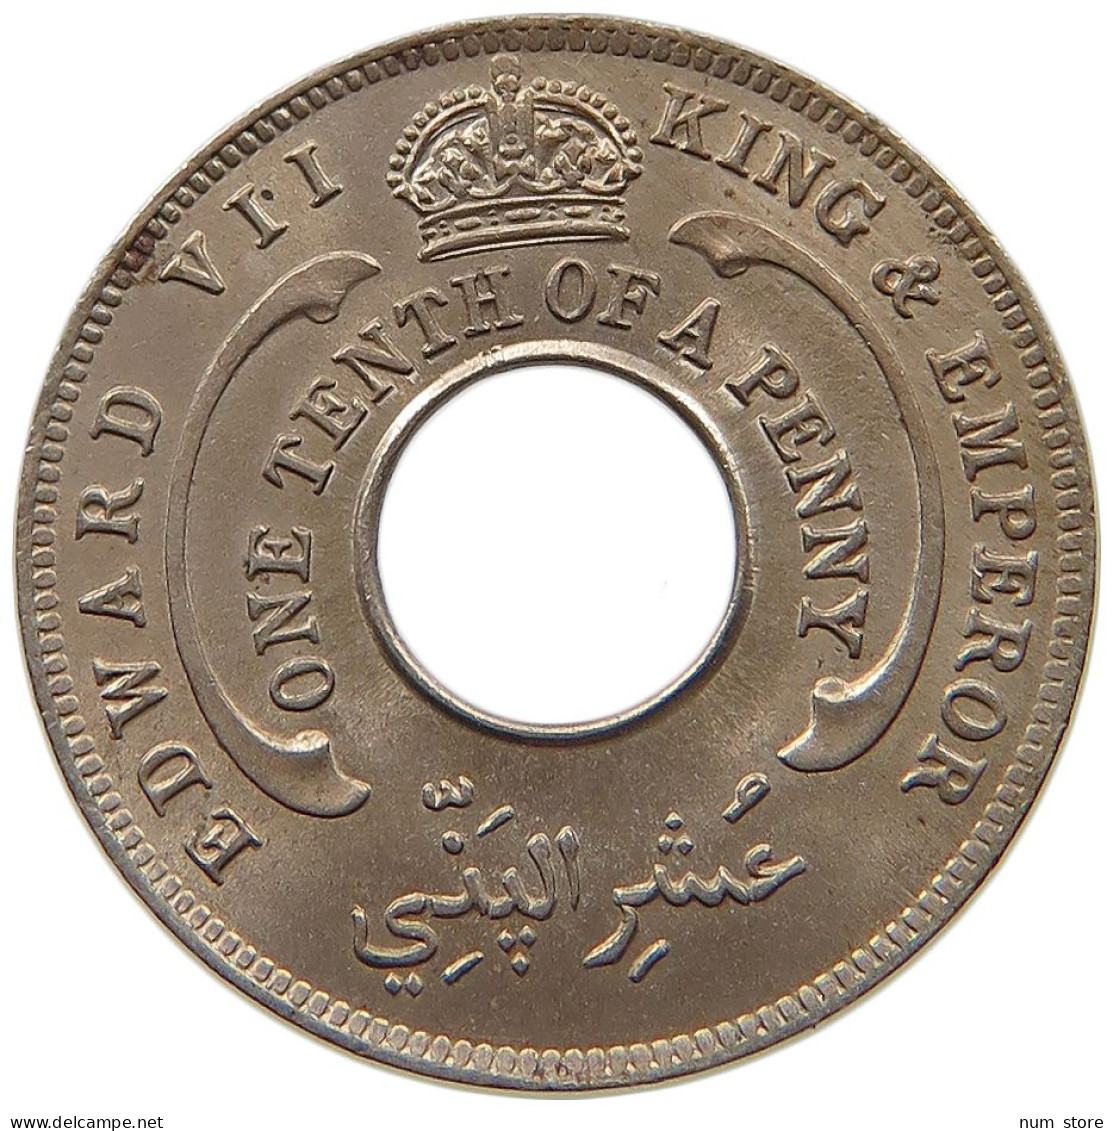 WEST AFRICA 1/10 PENNY 1908 Edward VII., 1901 - 1910 #t113 0163 - Colecciones